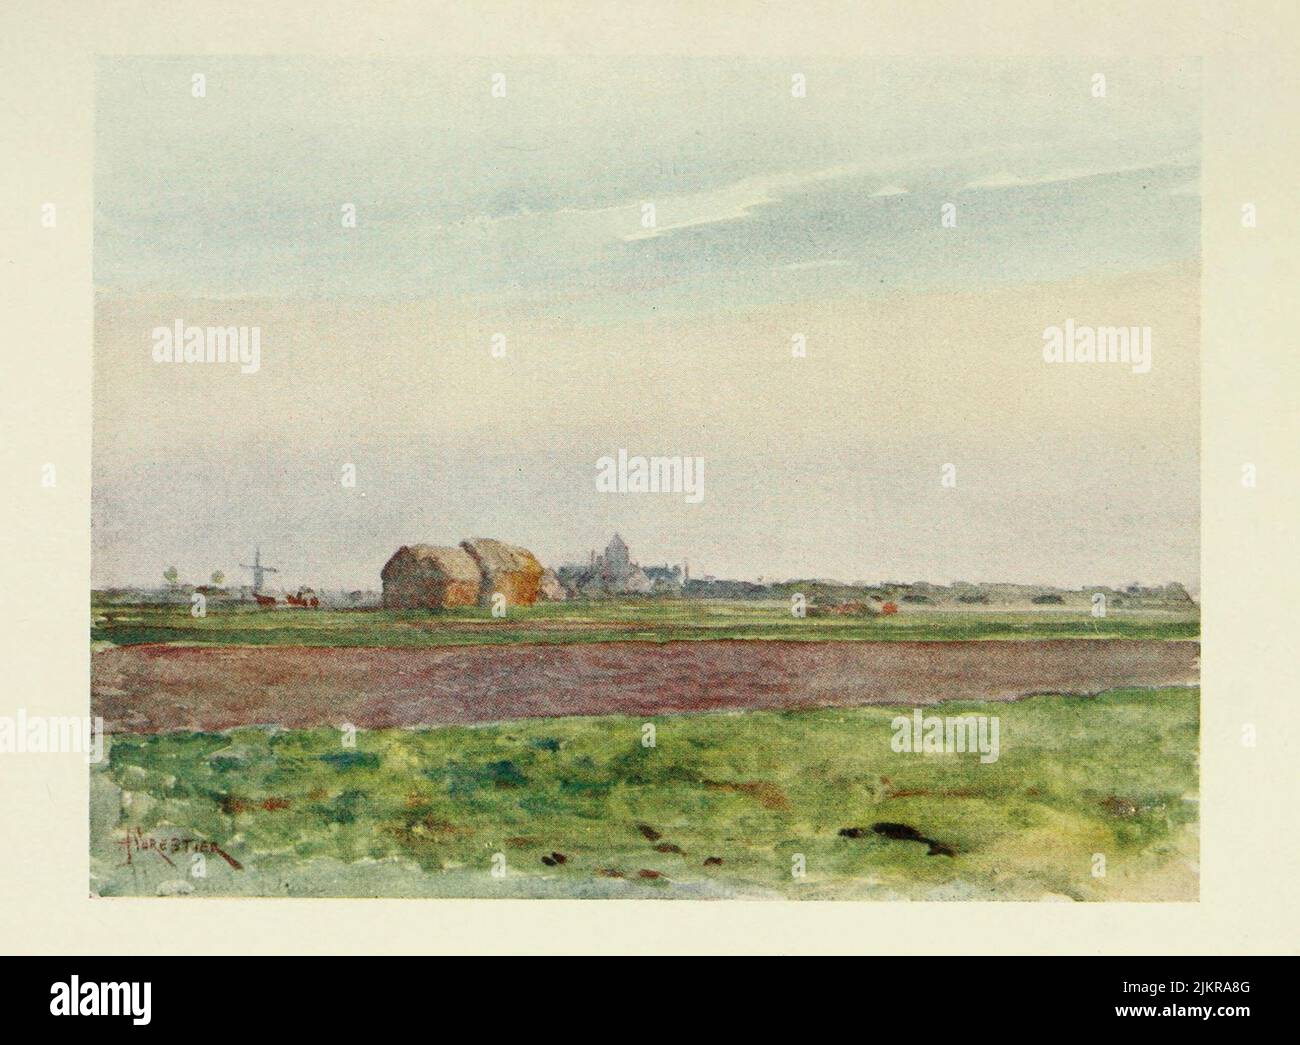 The Flemish Plain Painted by Amedee Forestier, from the book '  Bruges and West Flanders ' by George William Thomson Omond, Publication date 1906 Publisher London : A. & C. Black Sir Amédée Forestier (Paris 1854 – 18 November 1930 London) was an Anglo-French artist and illustrator who specialised in historical and prehistoric scenes, and landscapes. Stock Photo